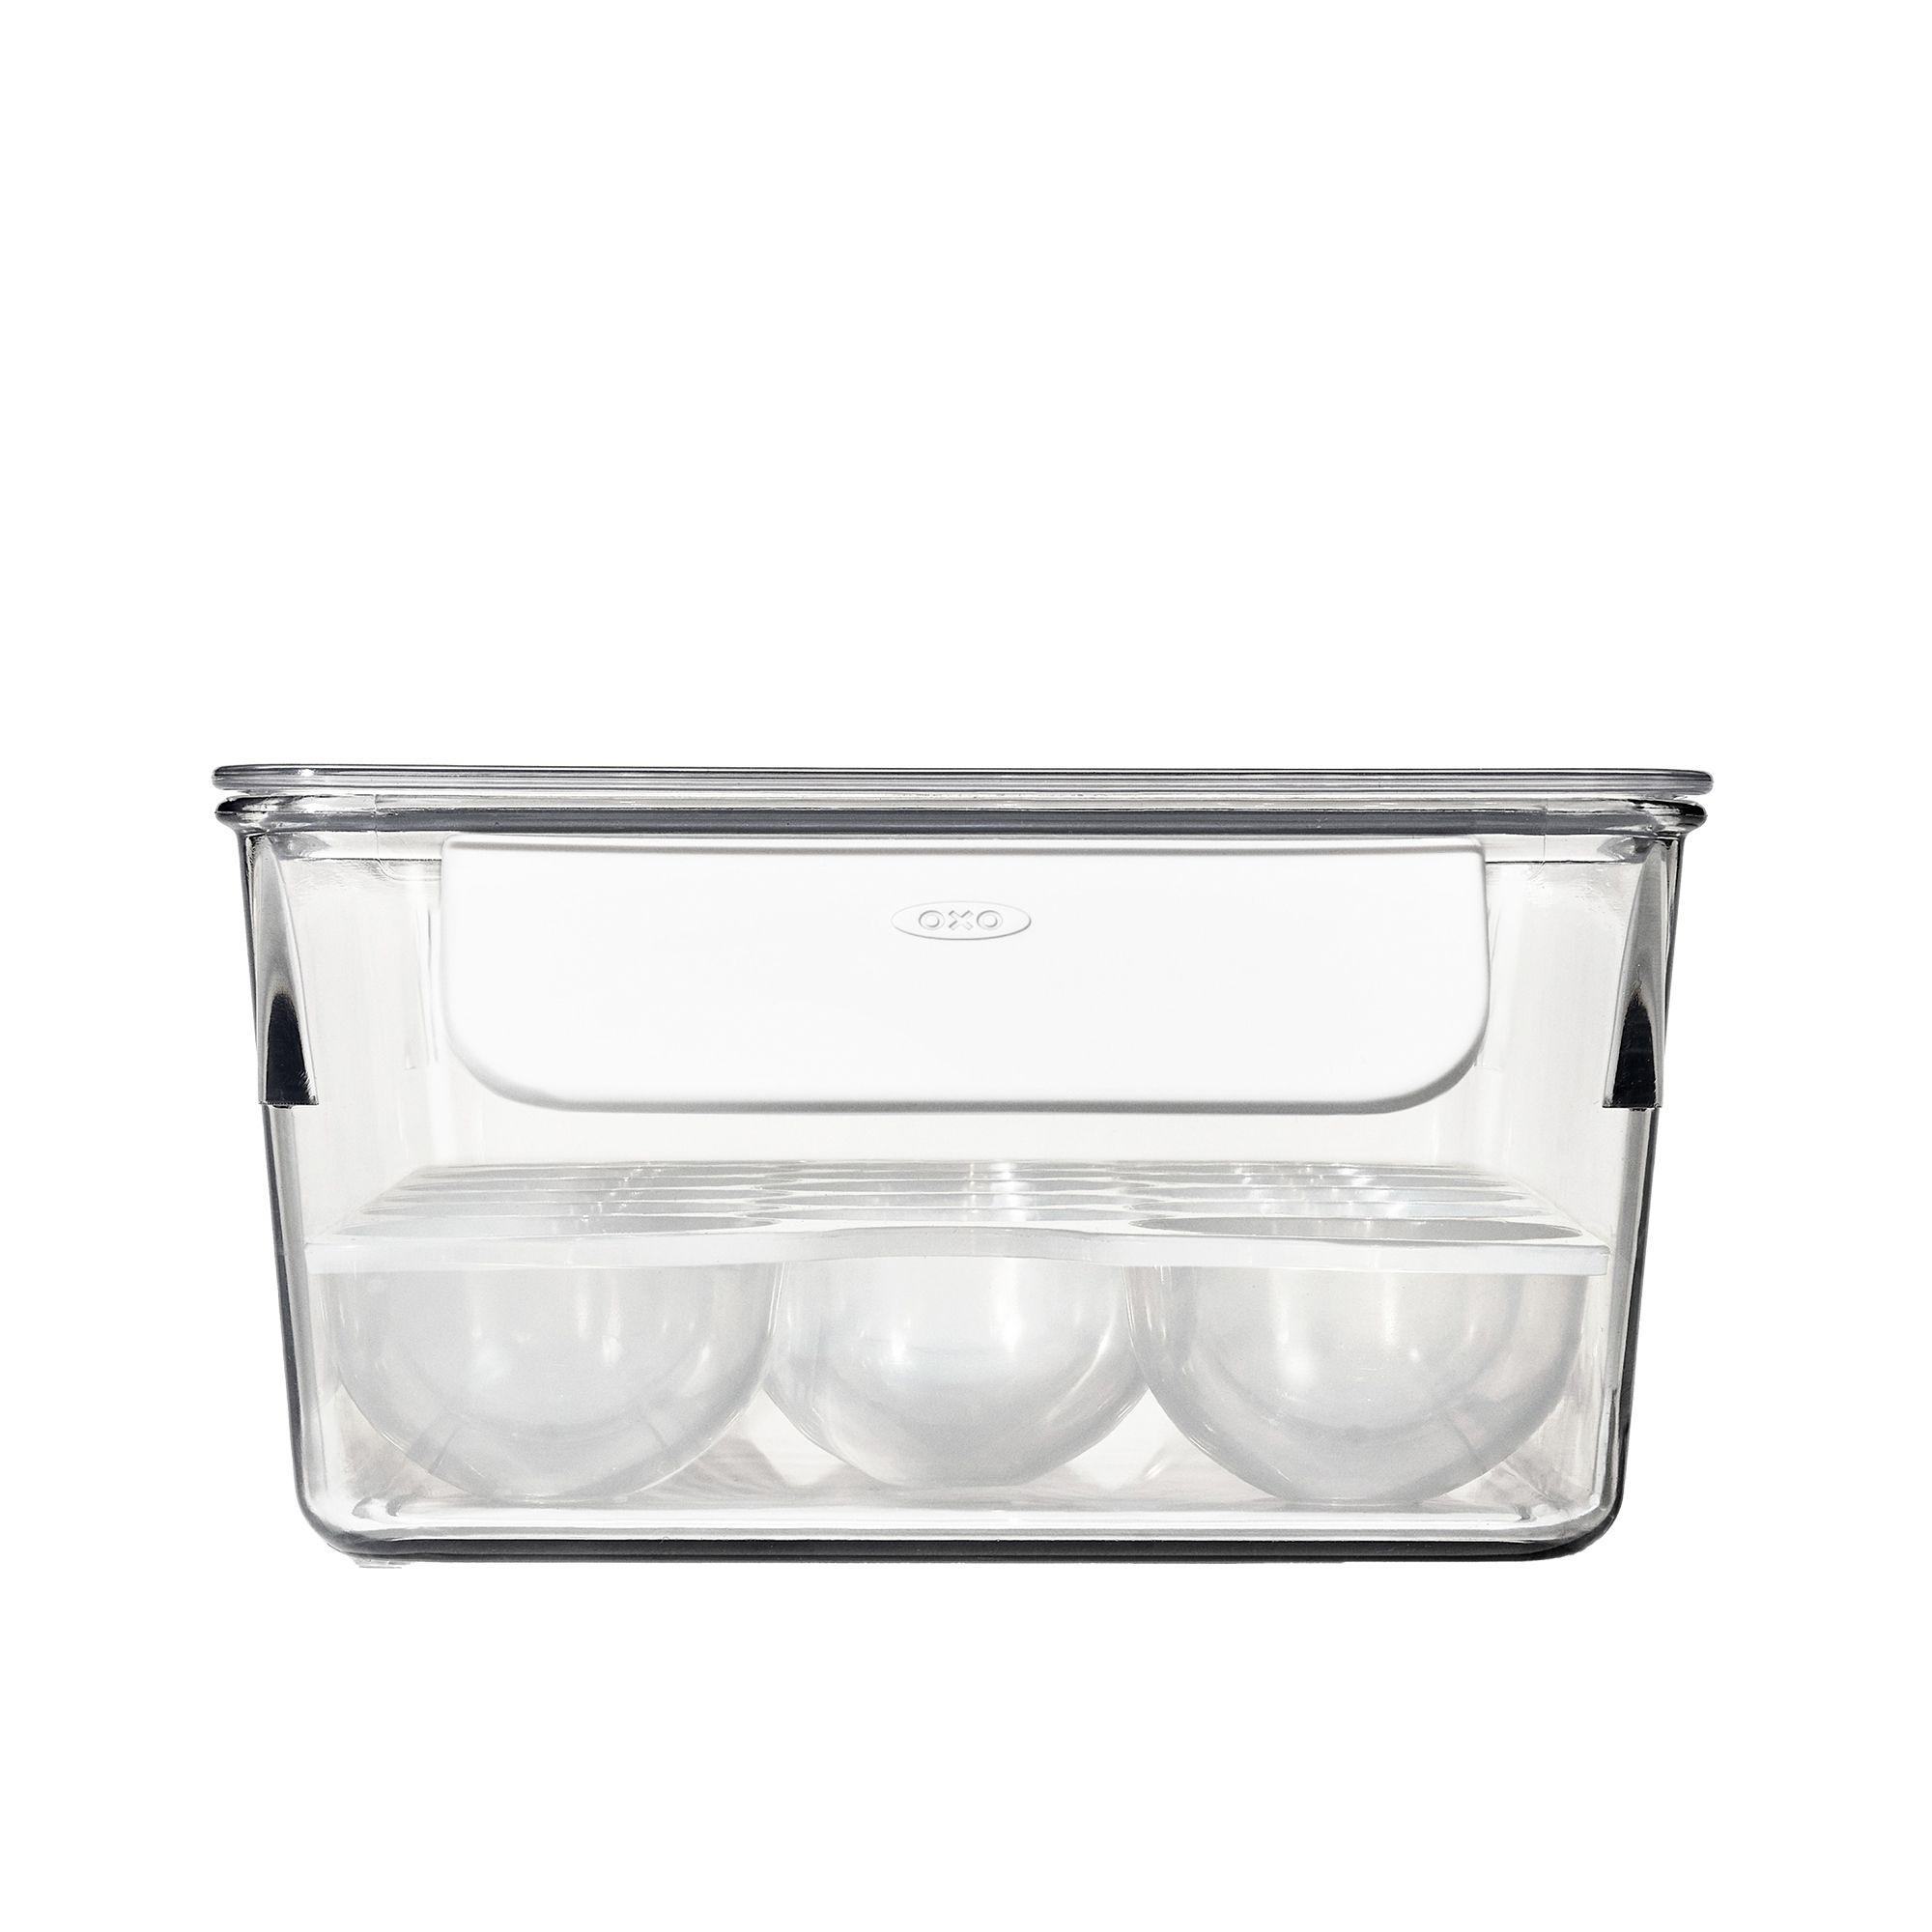 OXO Good Grips Fridge Egg Bin with Removable Tray Clear Image 3